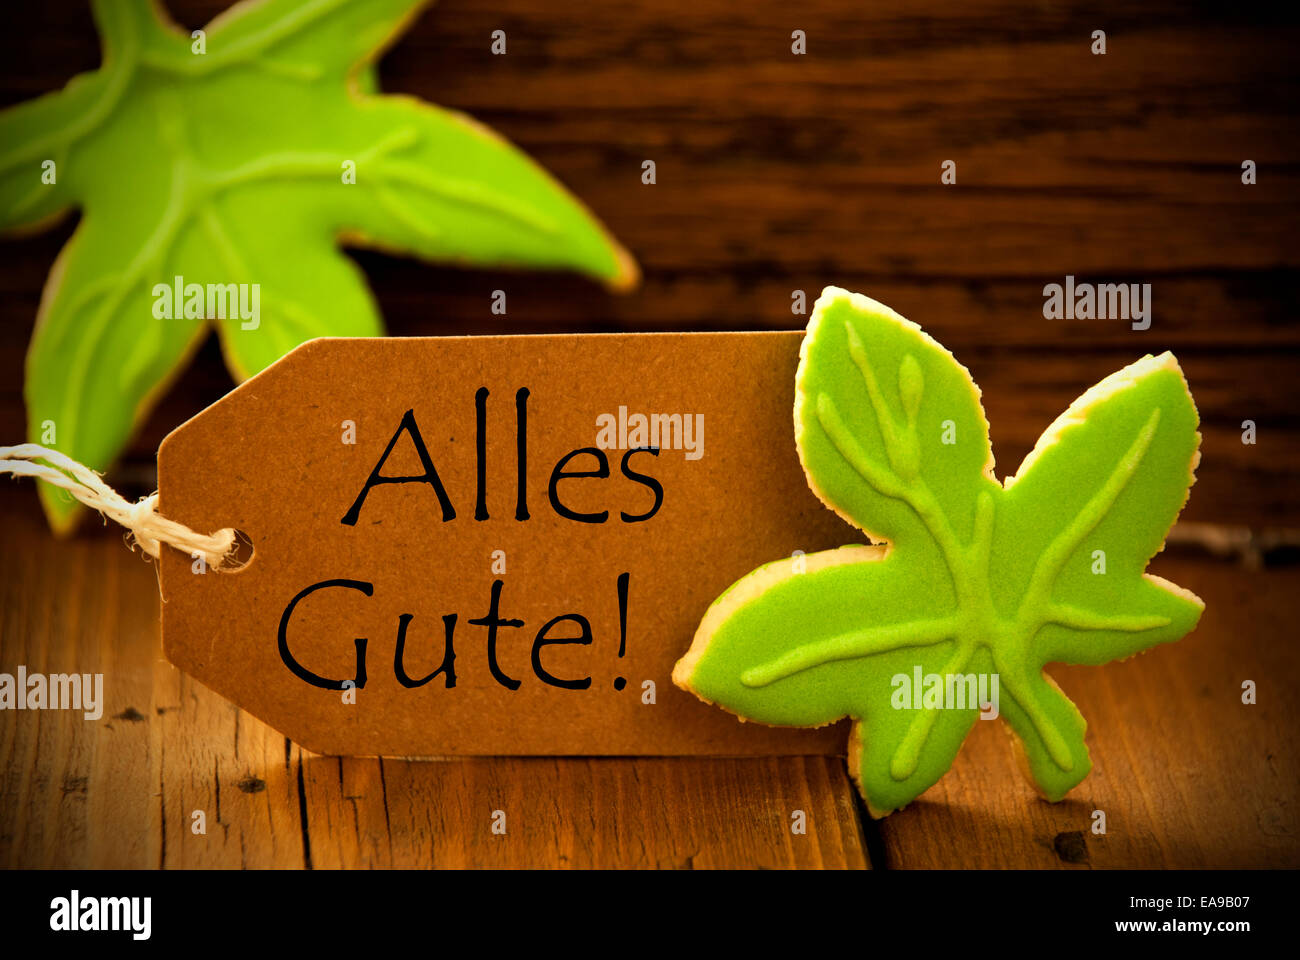 Brown Organic Label With German Text Alles Gute On Wooden Background With Two Leaf Cookies;Frame Stock Photo